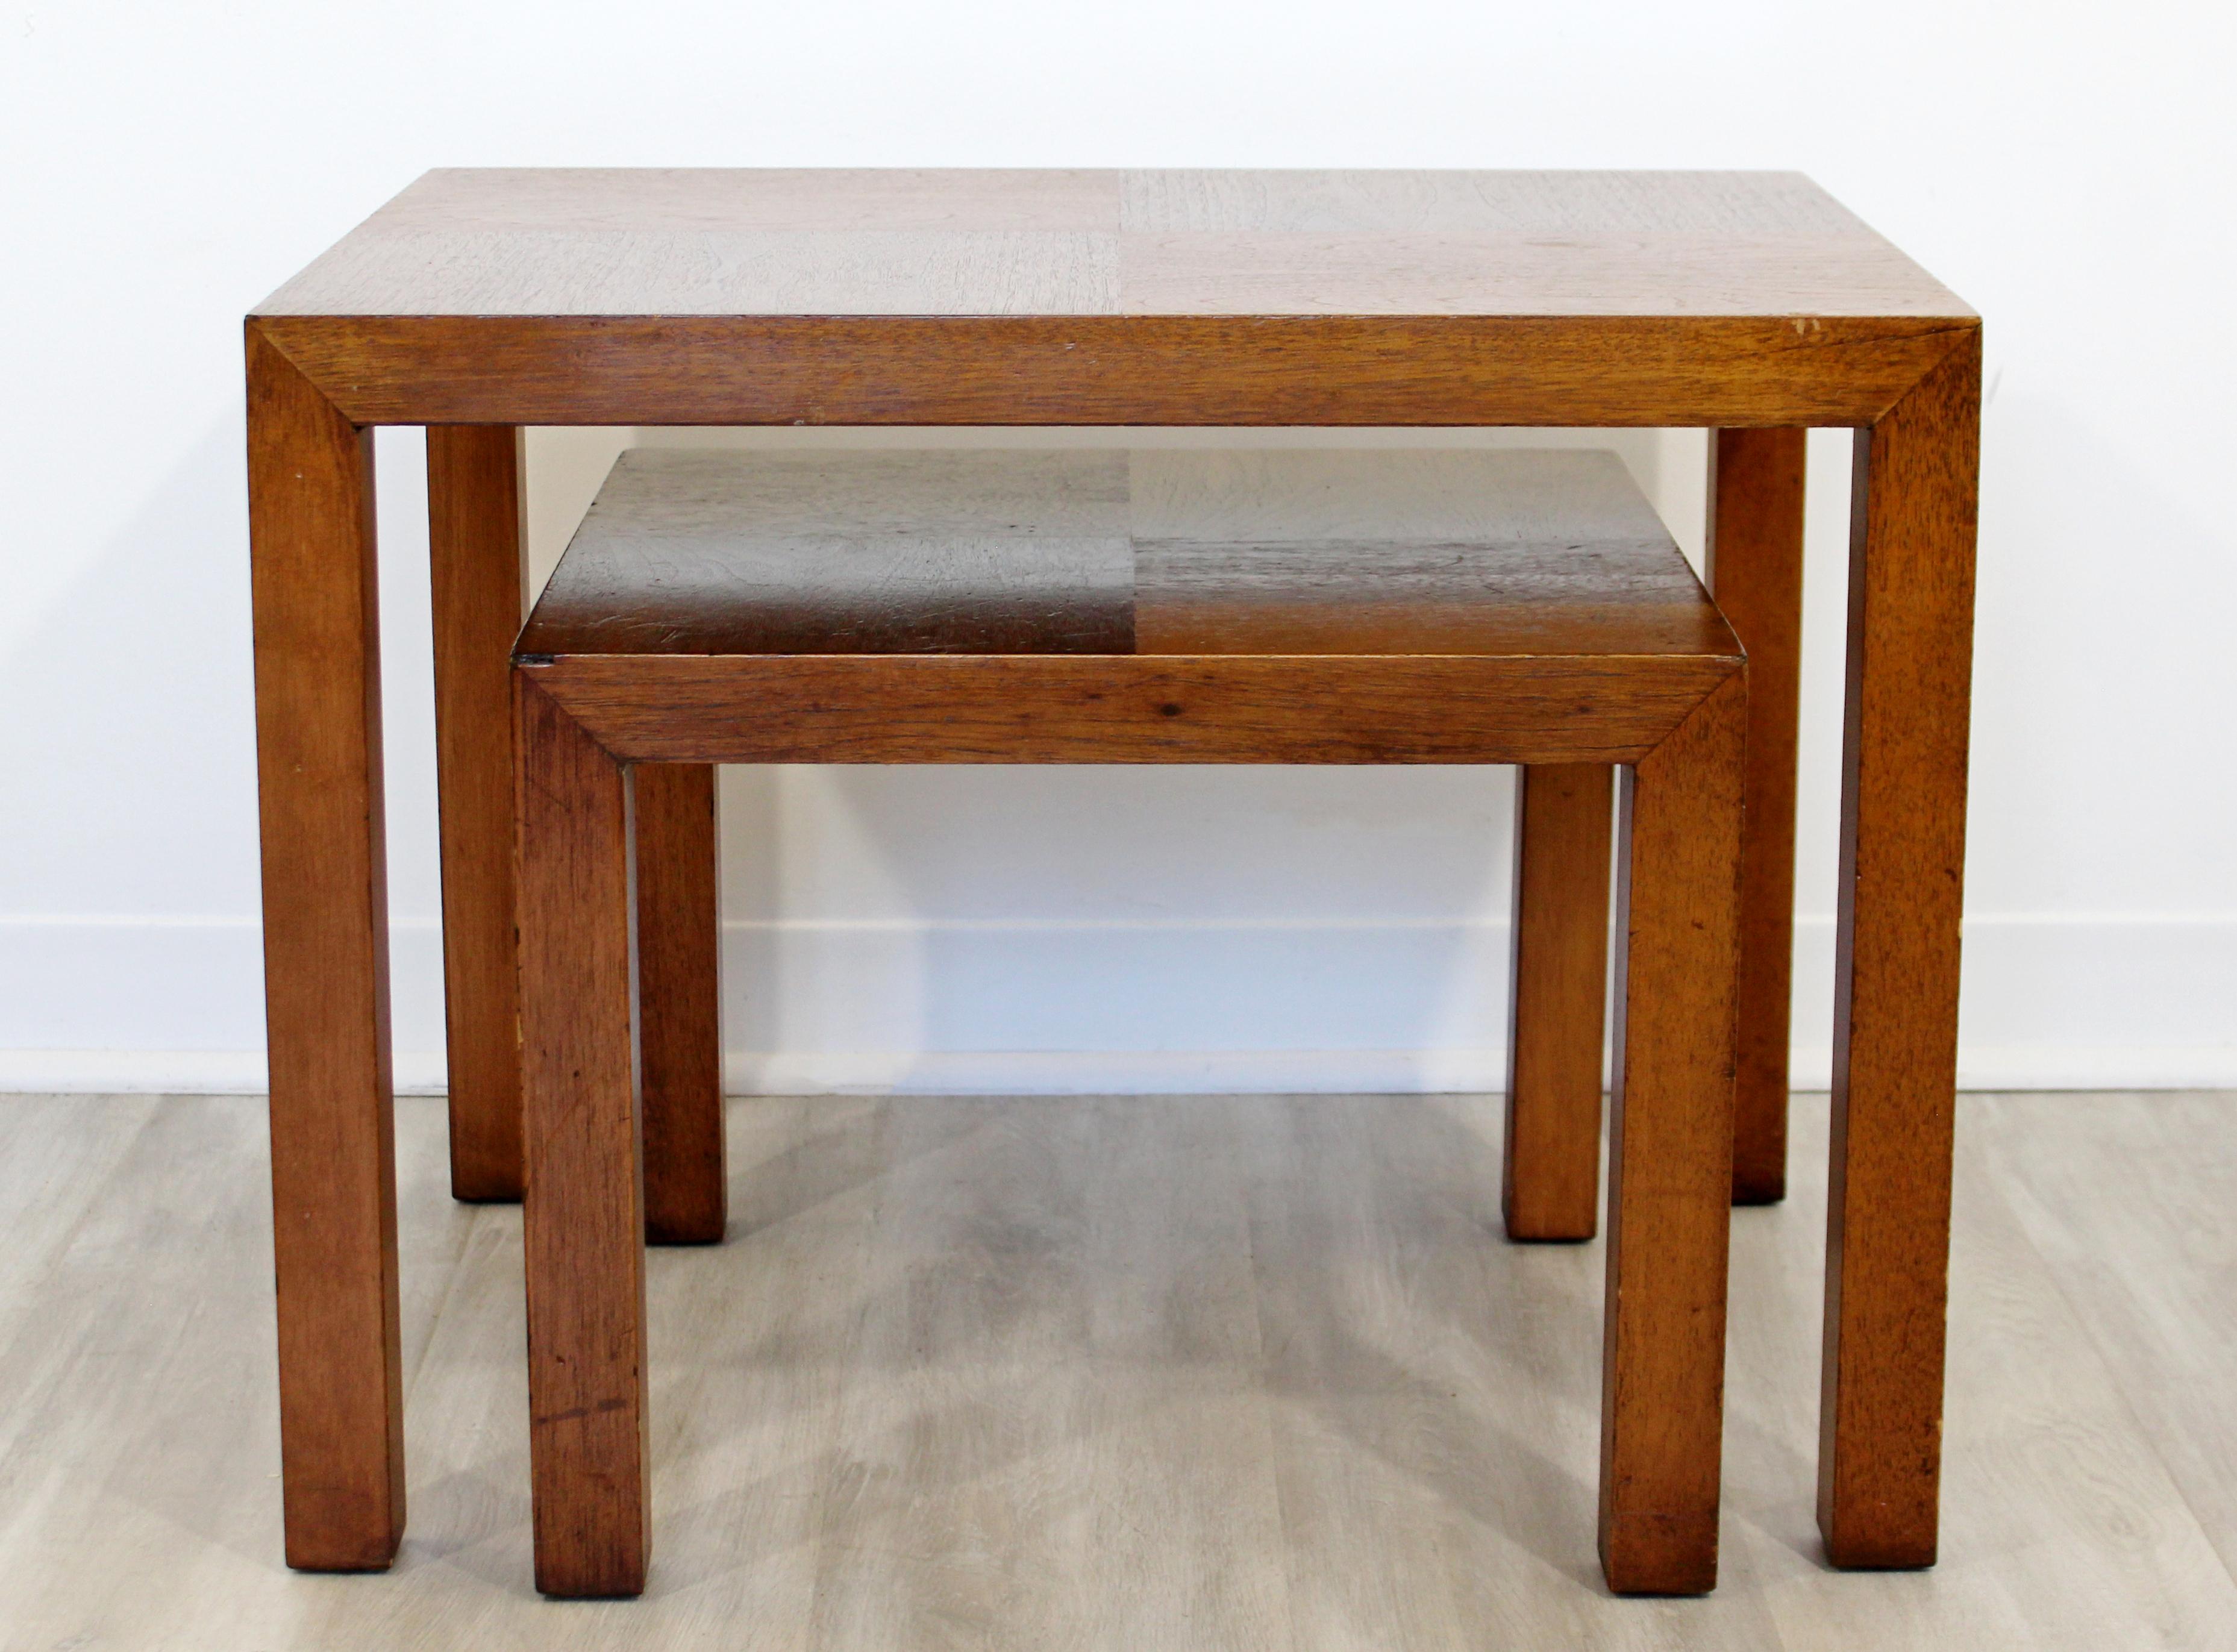 For your consideration is a neat pair of wood nesting tables that fit into one another, by Lane Altavista, circa 1960s. In very good vintage condition. The larger table measures 26